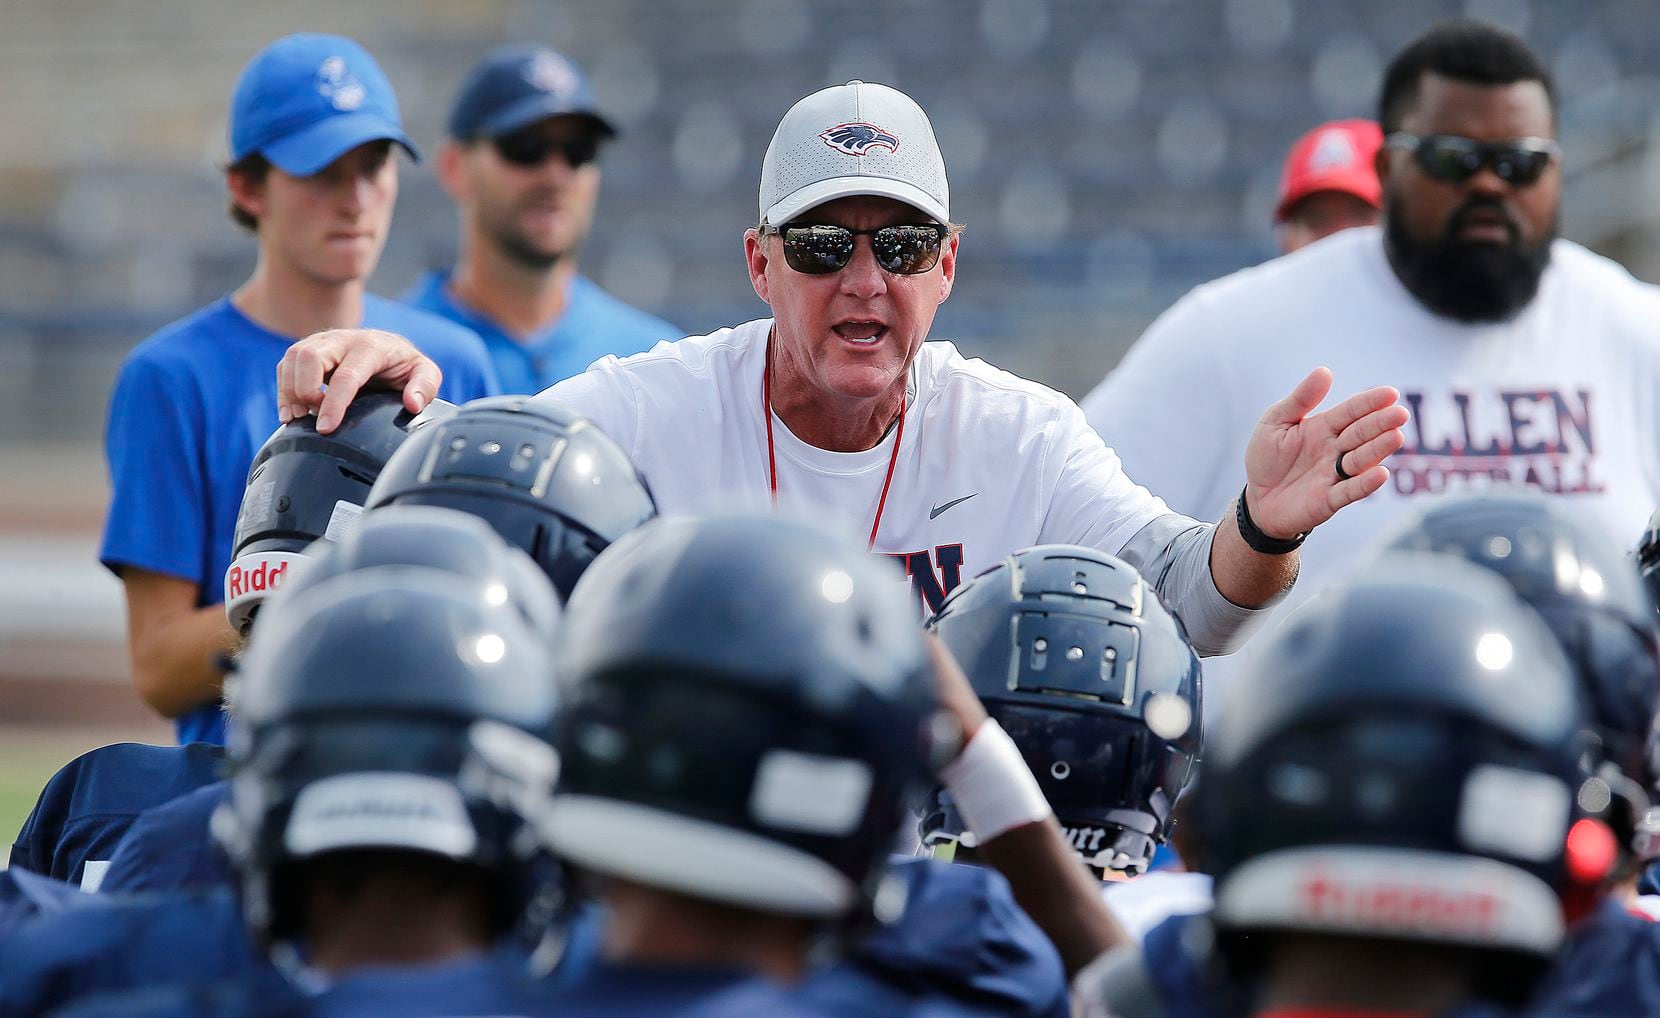 Allen High School head football coach Chad Morris talks to his team before practice after  Allen High School held media day on Saturday morning, August 14, 2021. (Stewart F. House/Special Contributor)